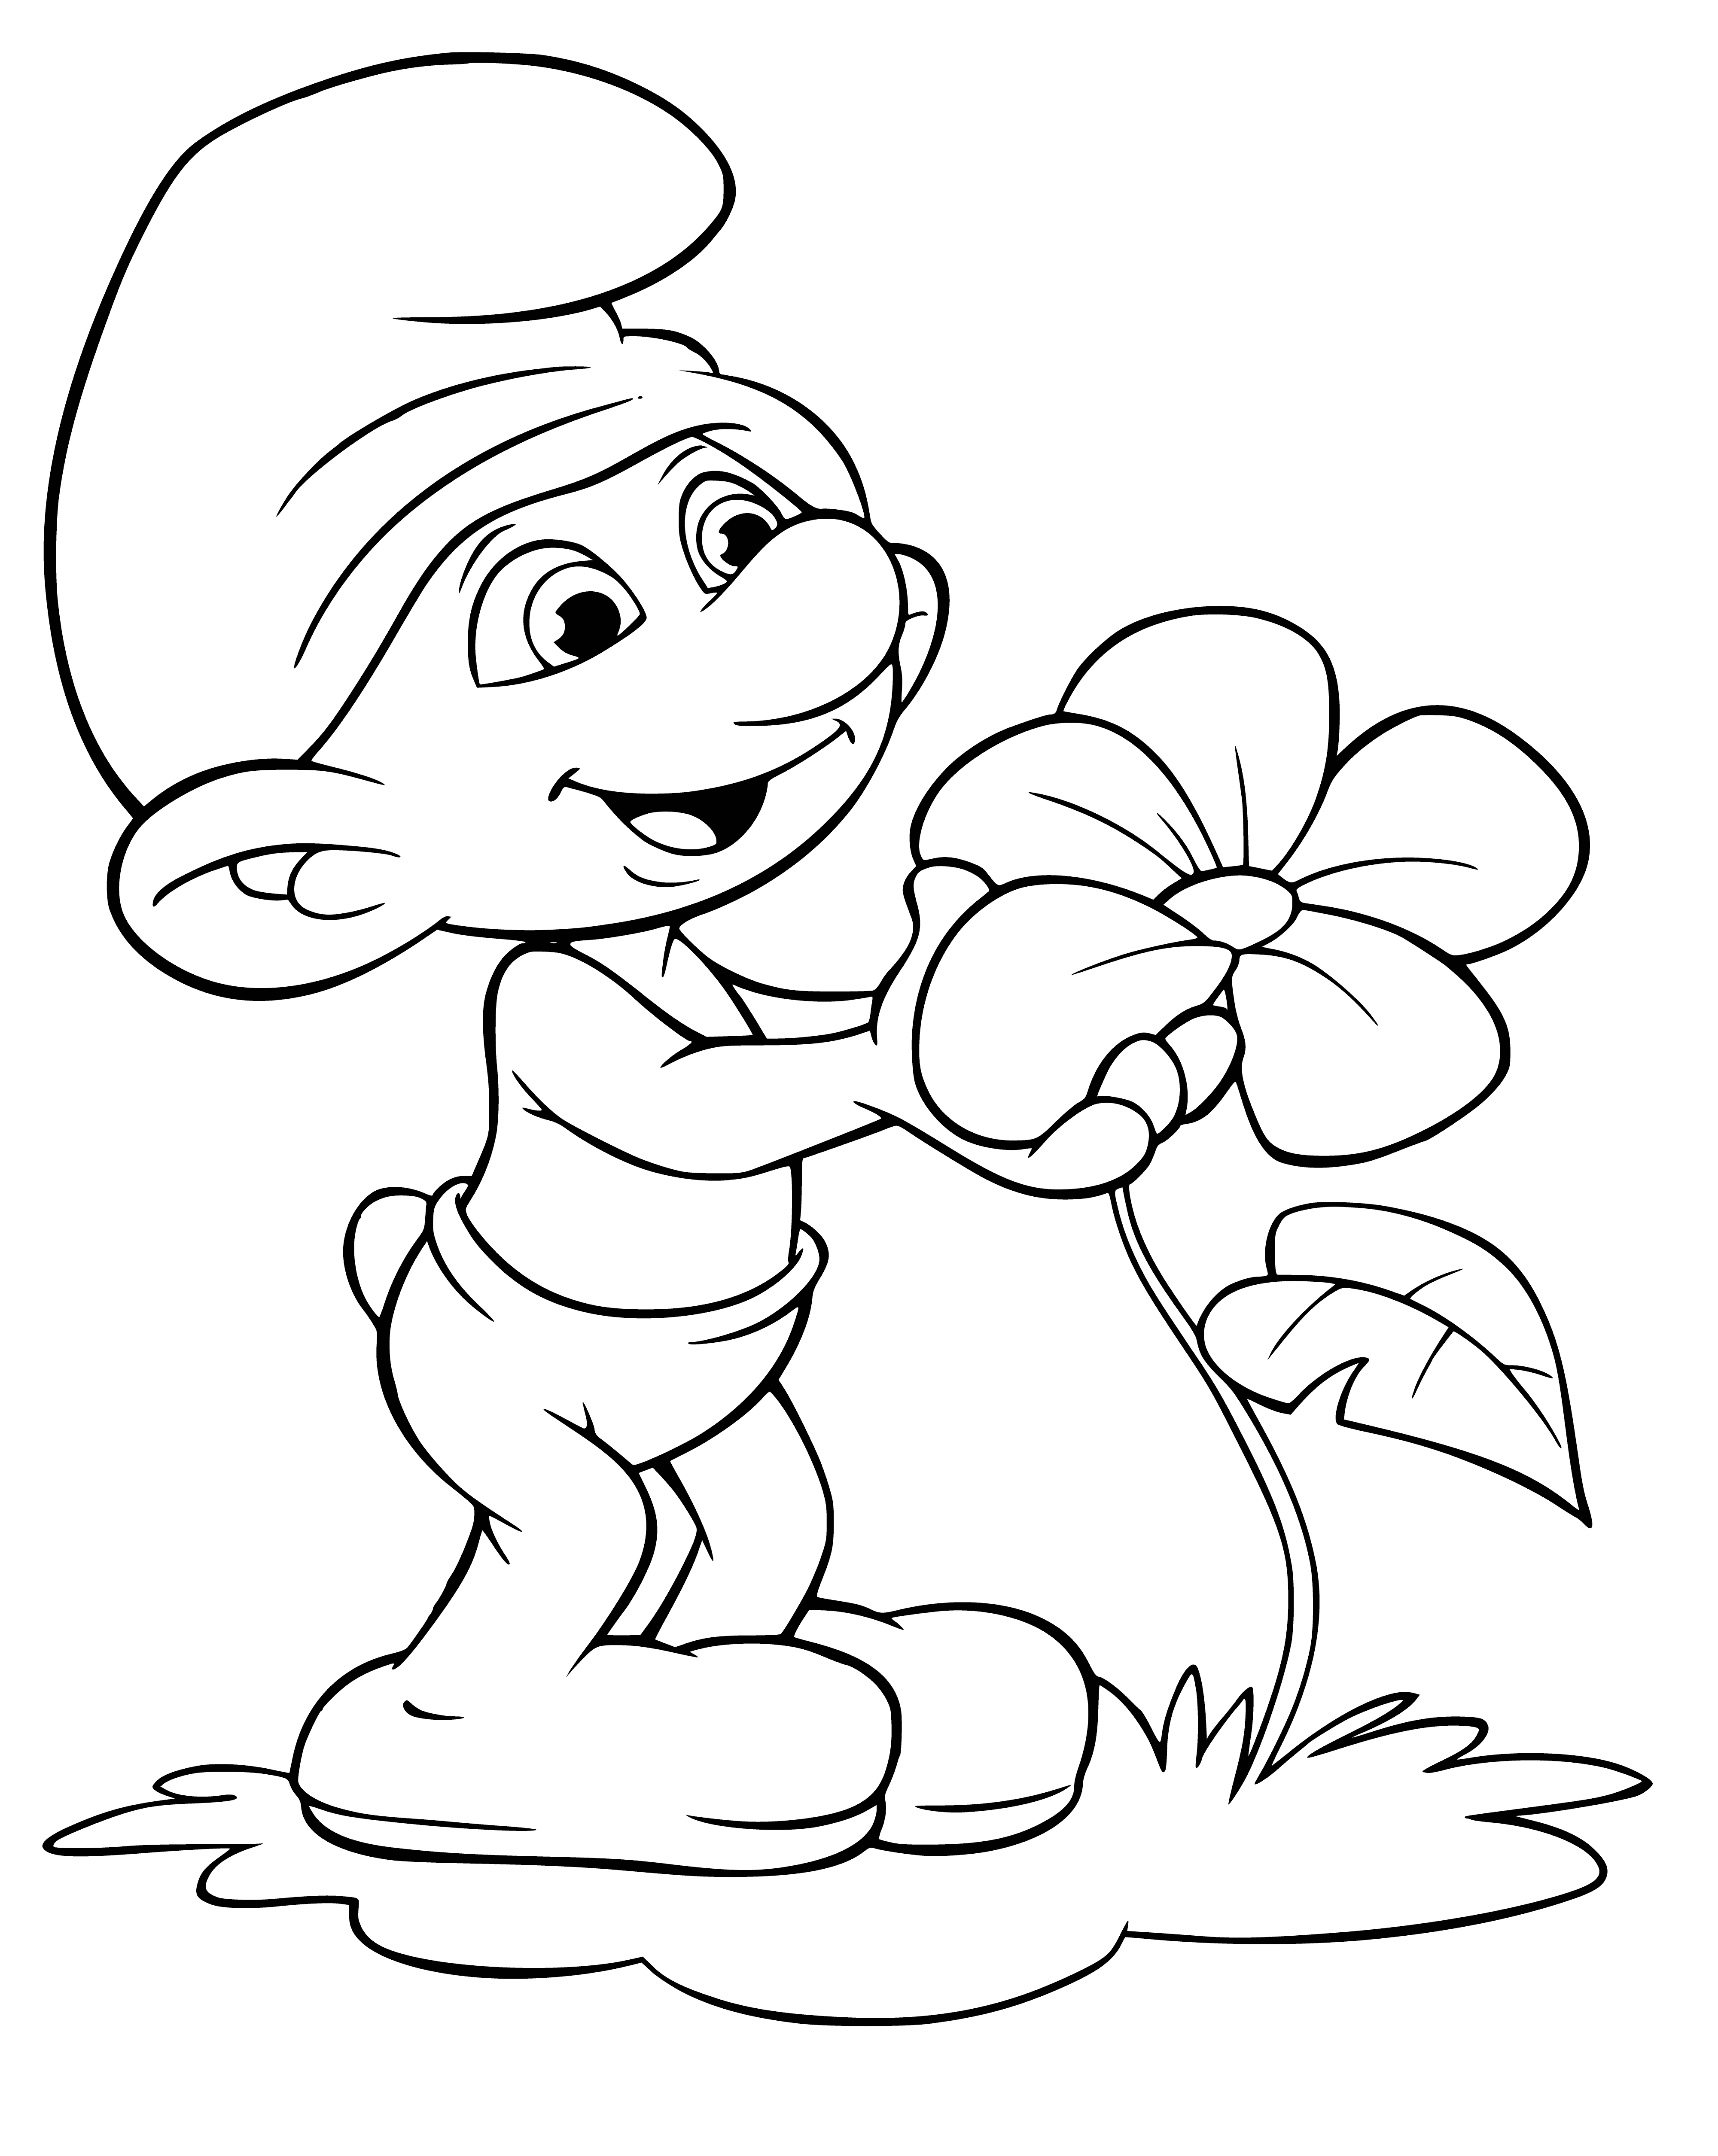 coloring page: Cute Smurf Rastyapa coloring page w/ blue body, white stomach, white spots; no nose, mouth, 2 eyes; short arms & legs. #coloring #Smurfs